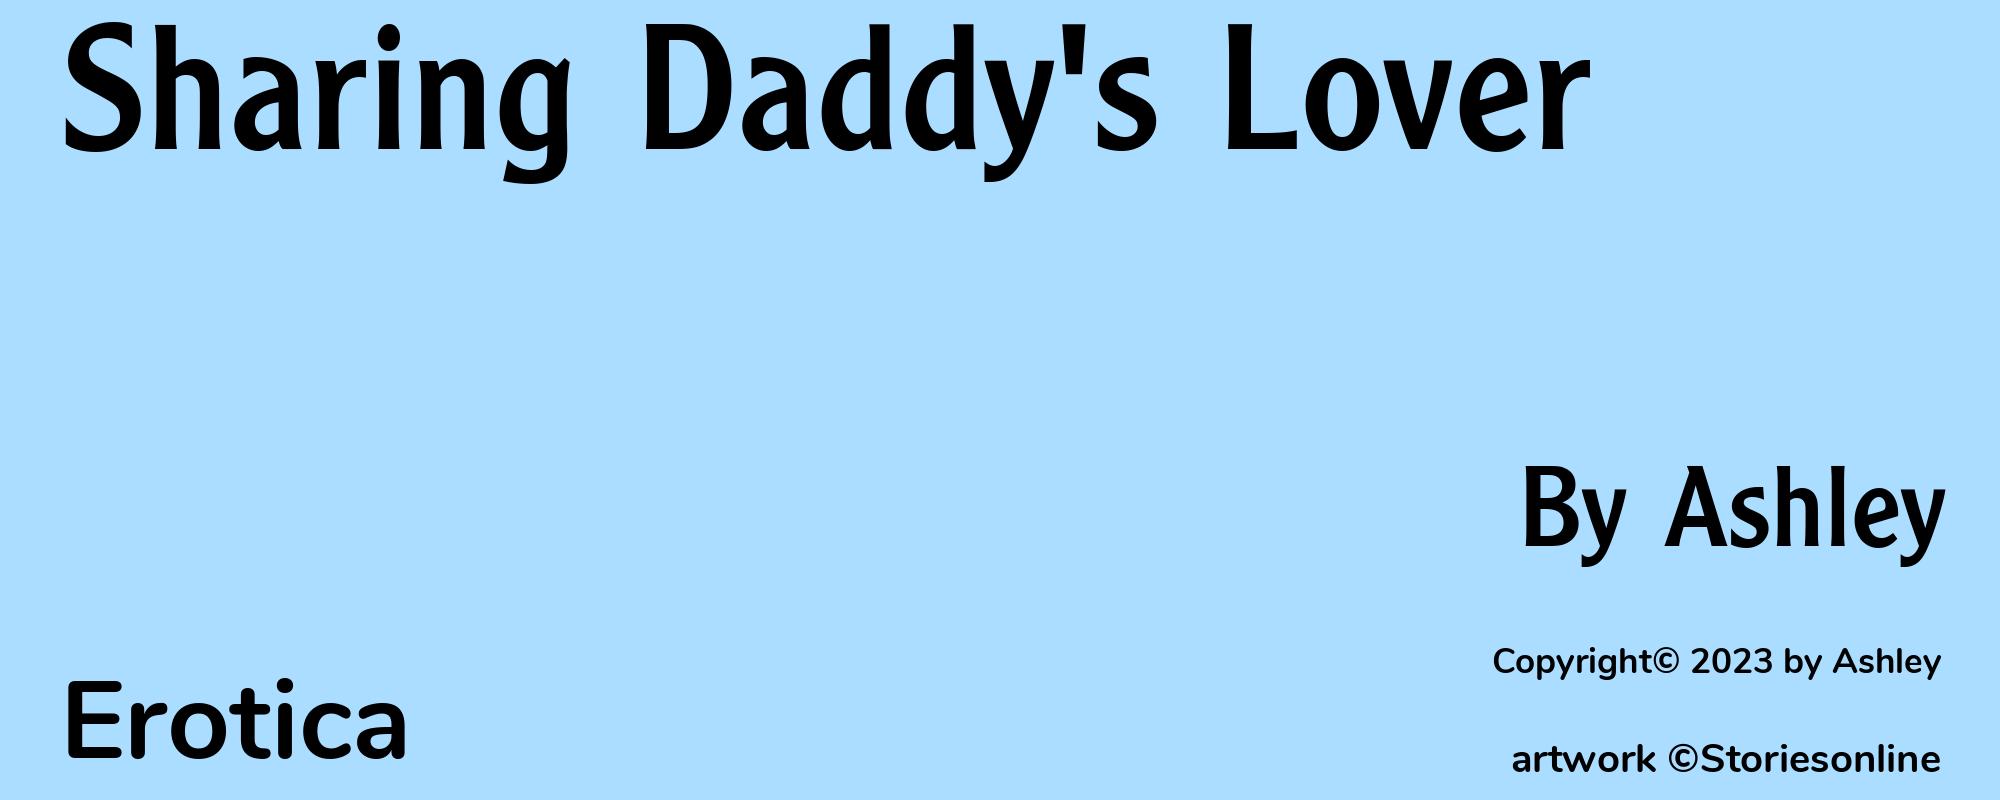 Sharing Daddy's Lover - Cover